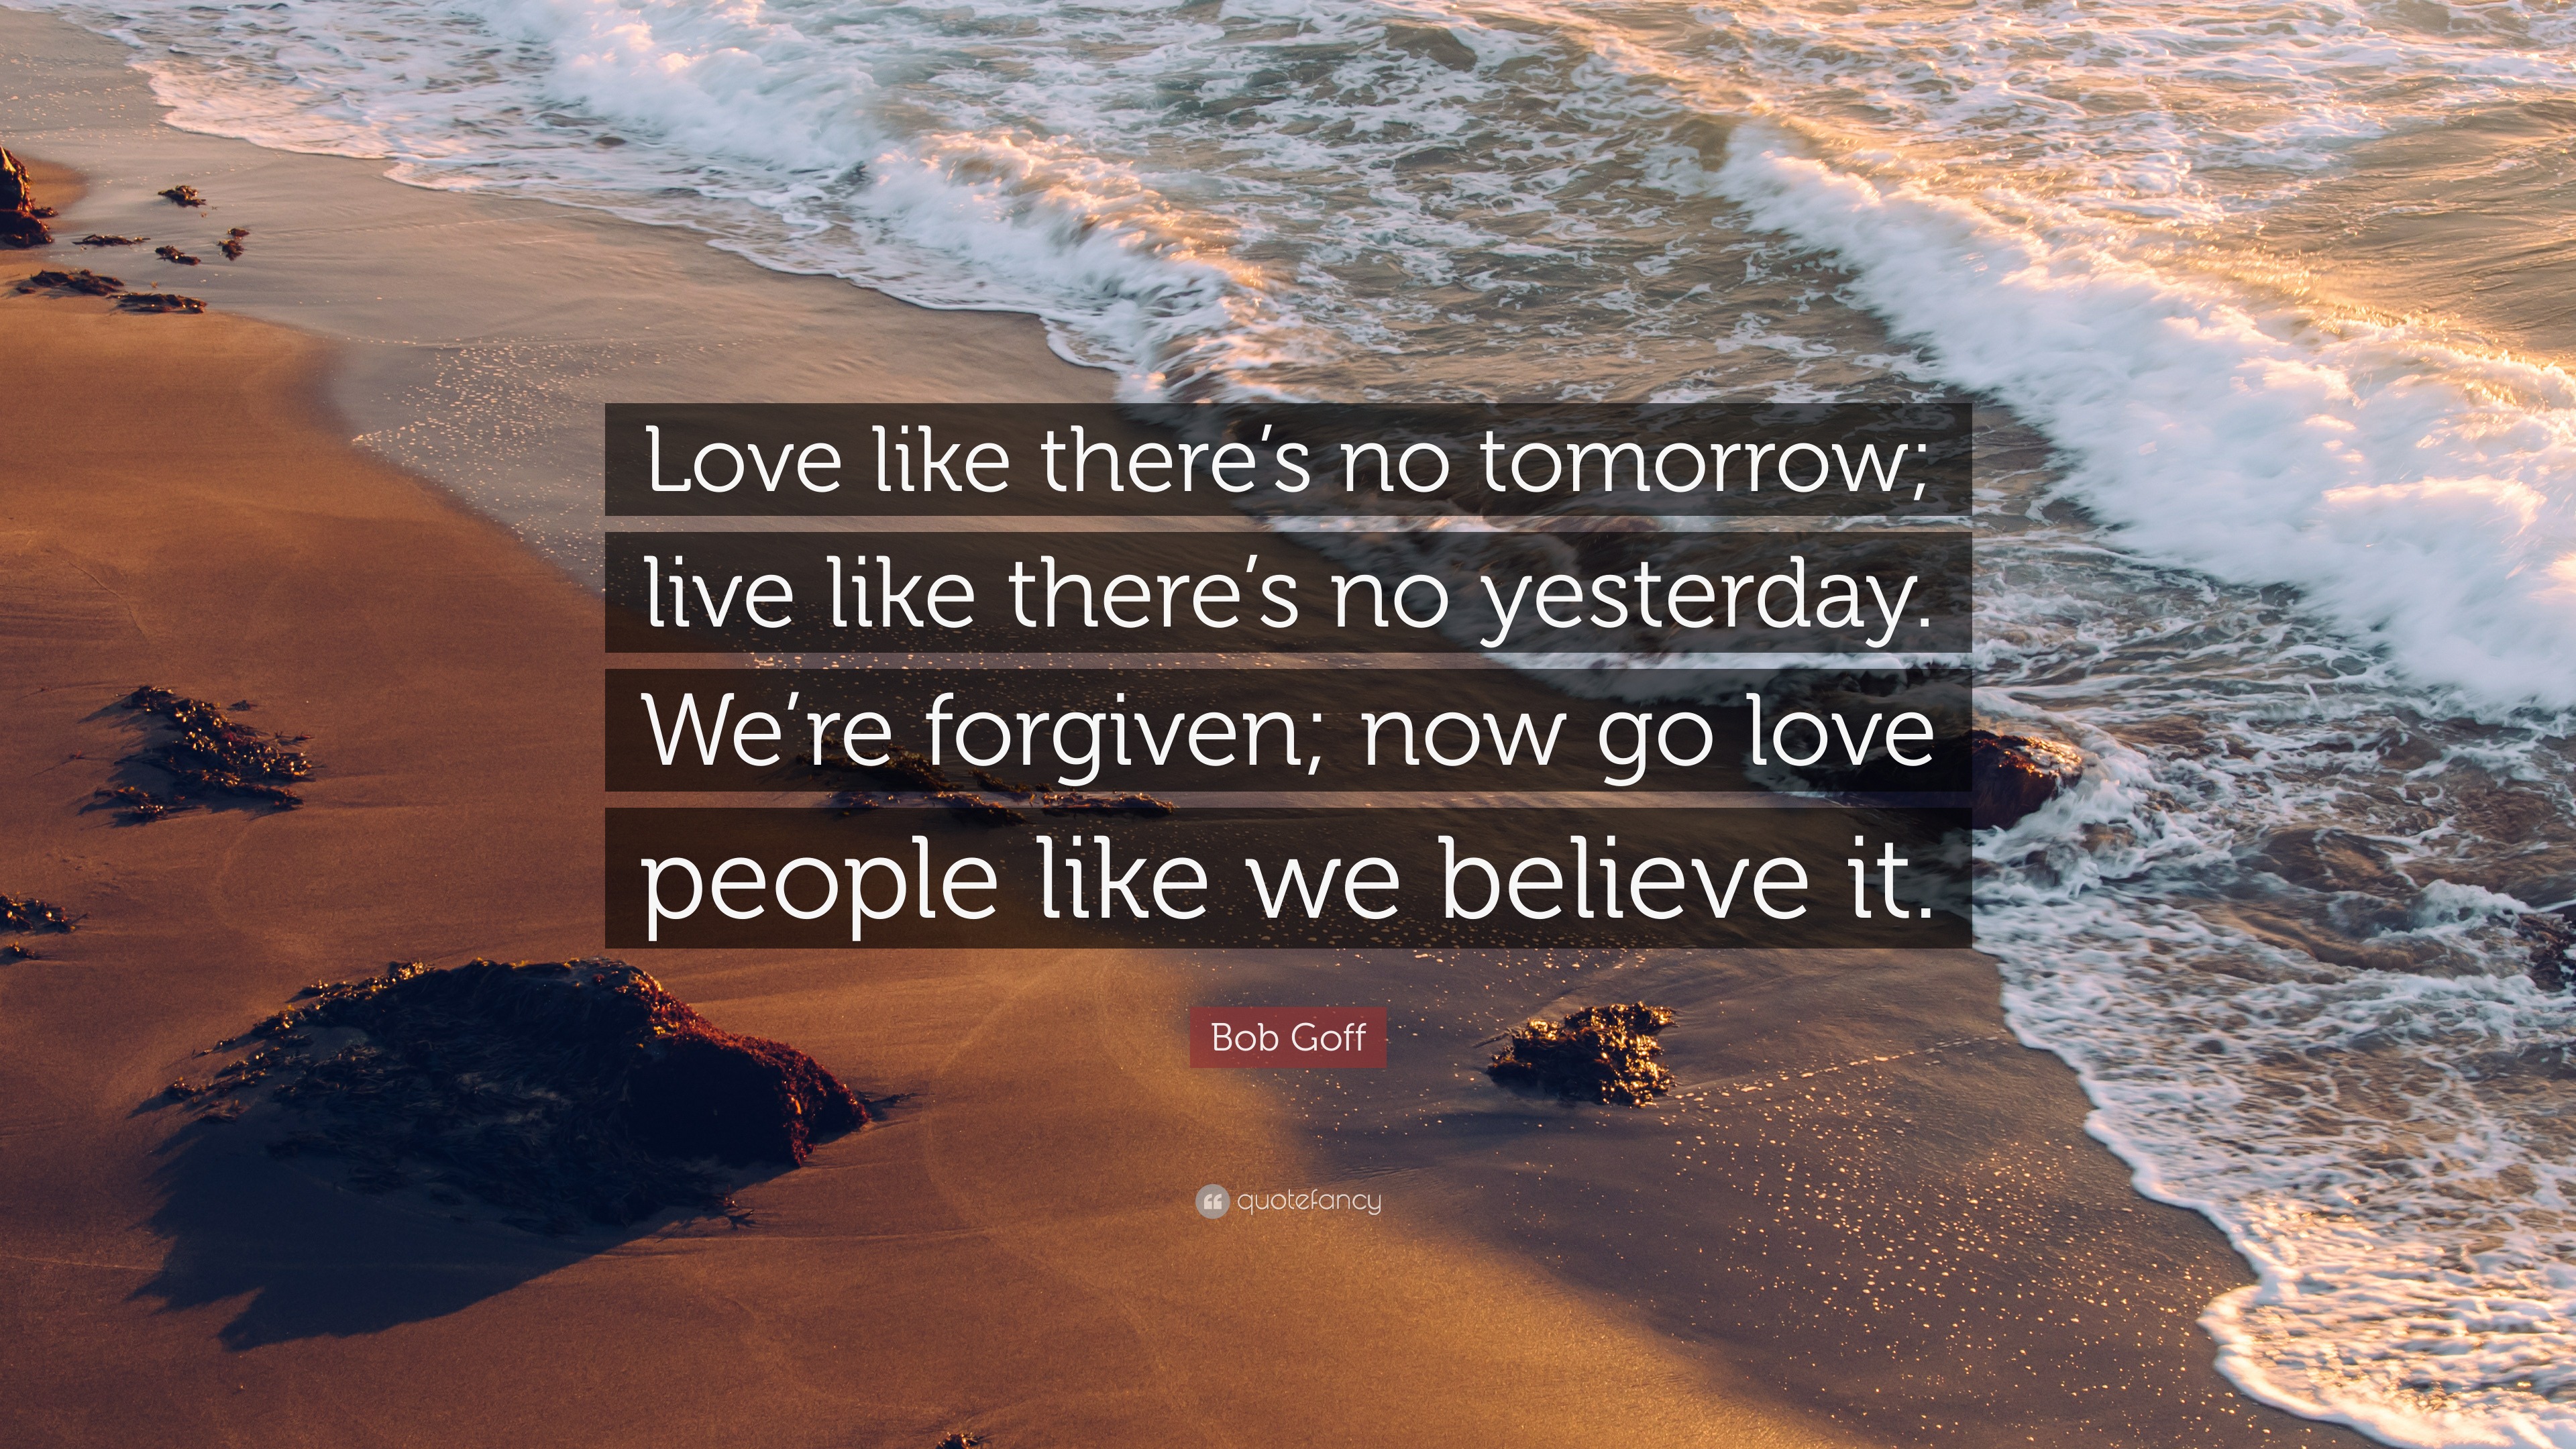 Bob Goff Quote “Love like there s no tomorrow live like there s no yesterday